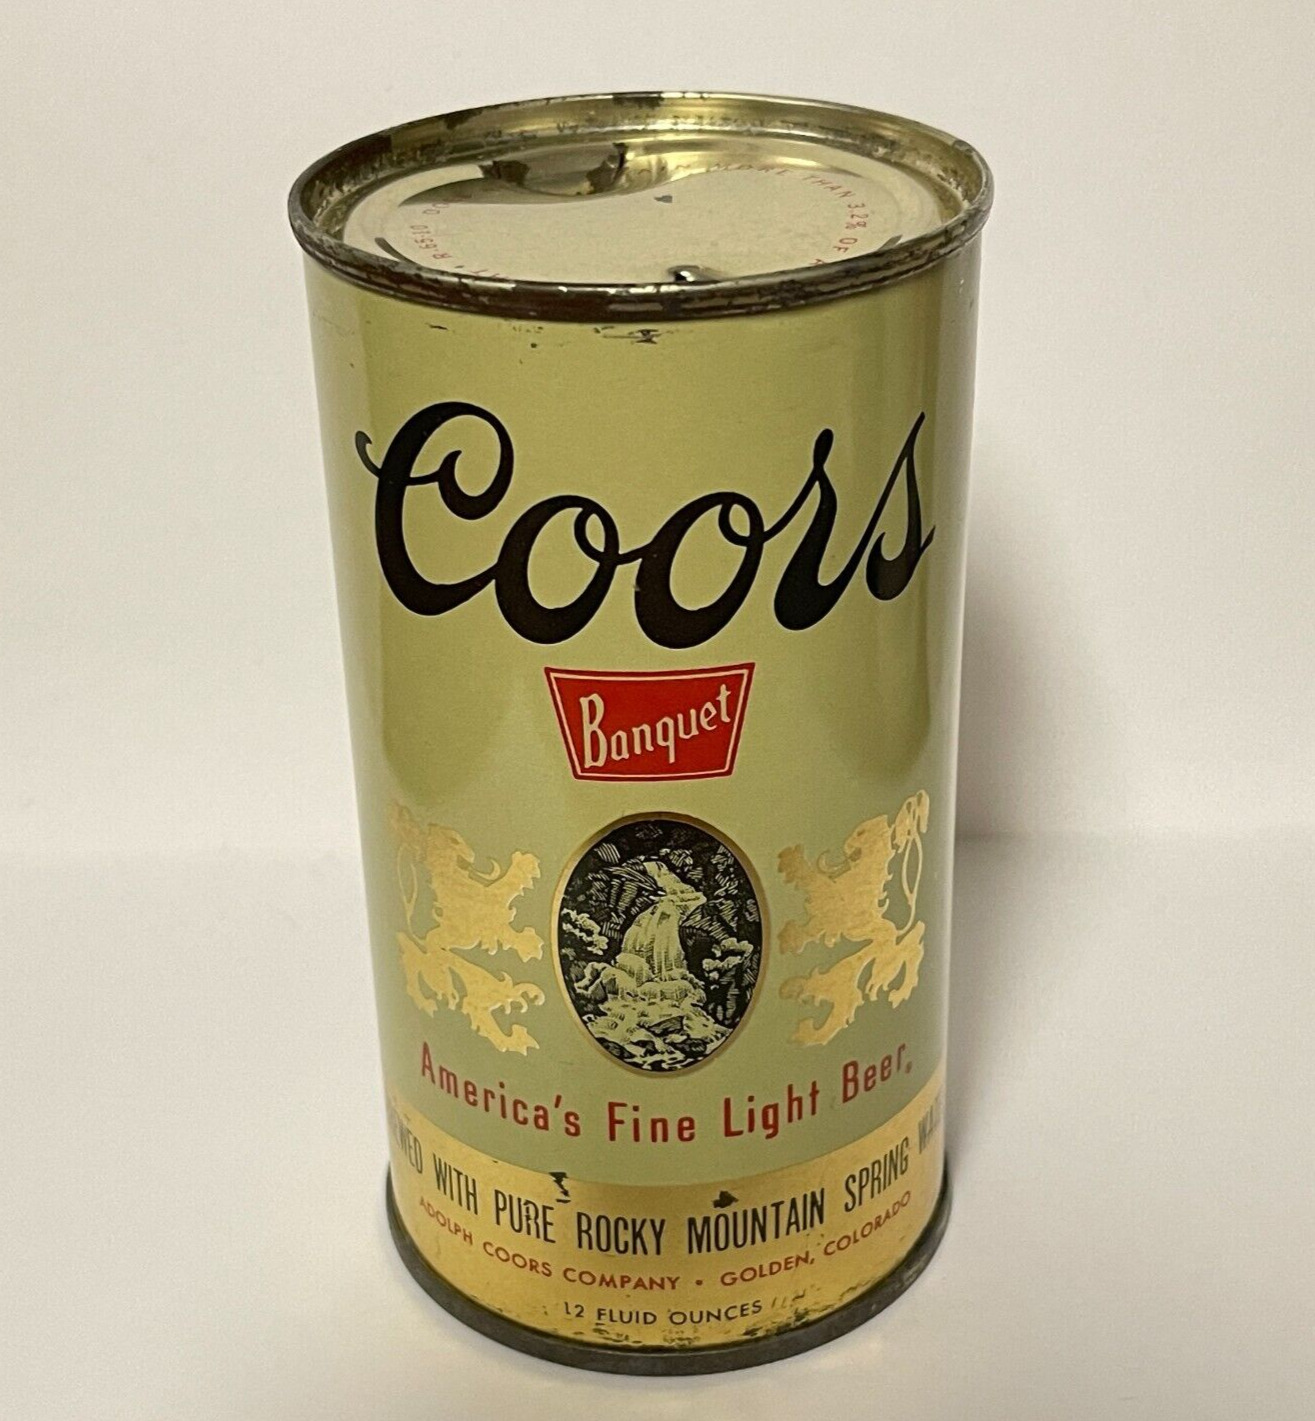 COORS BANQUET Flat Top Beer Can USBC#51-24  3.2% Alcohol STAMP on lid CO  EMPTY